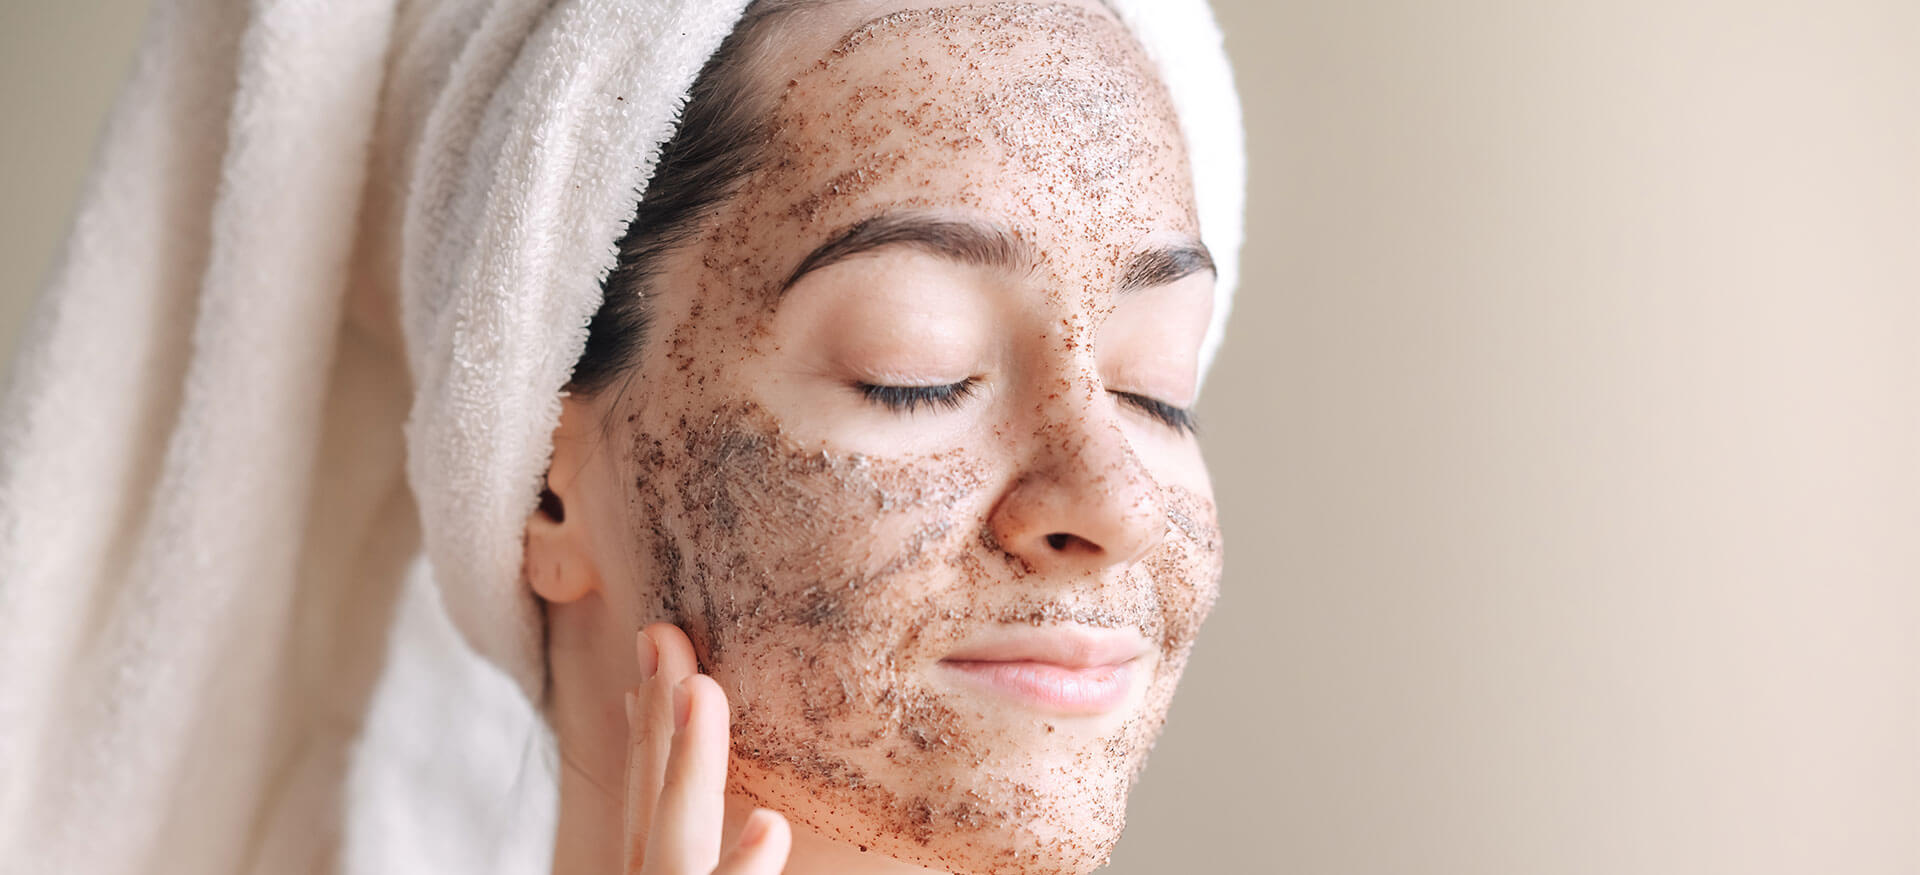 Regularly exfoliate your skin for a healthy glow